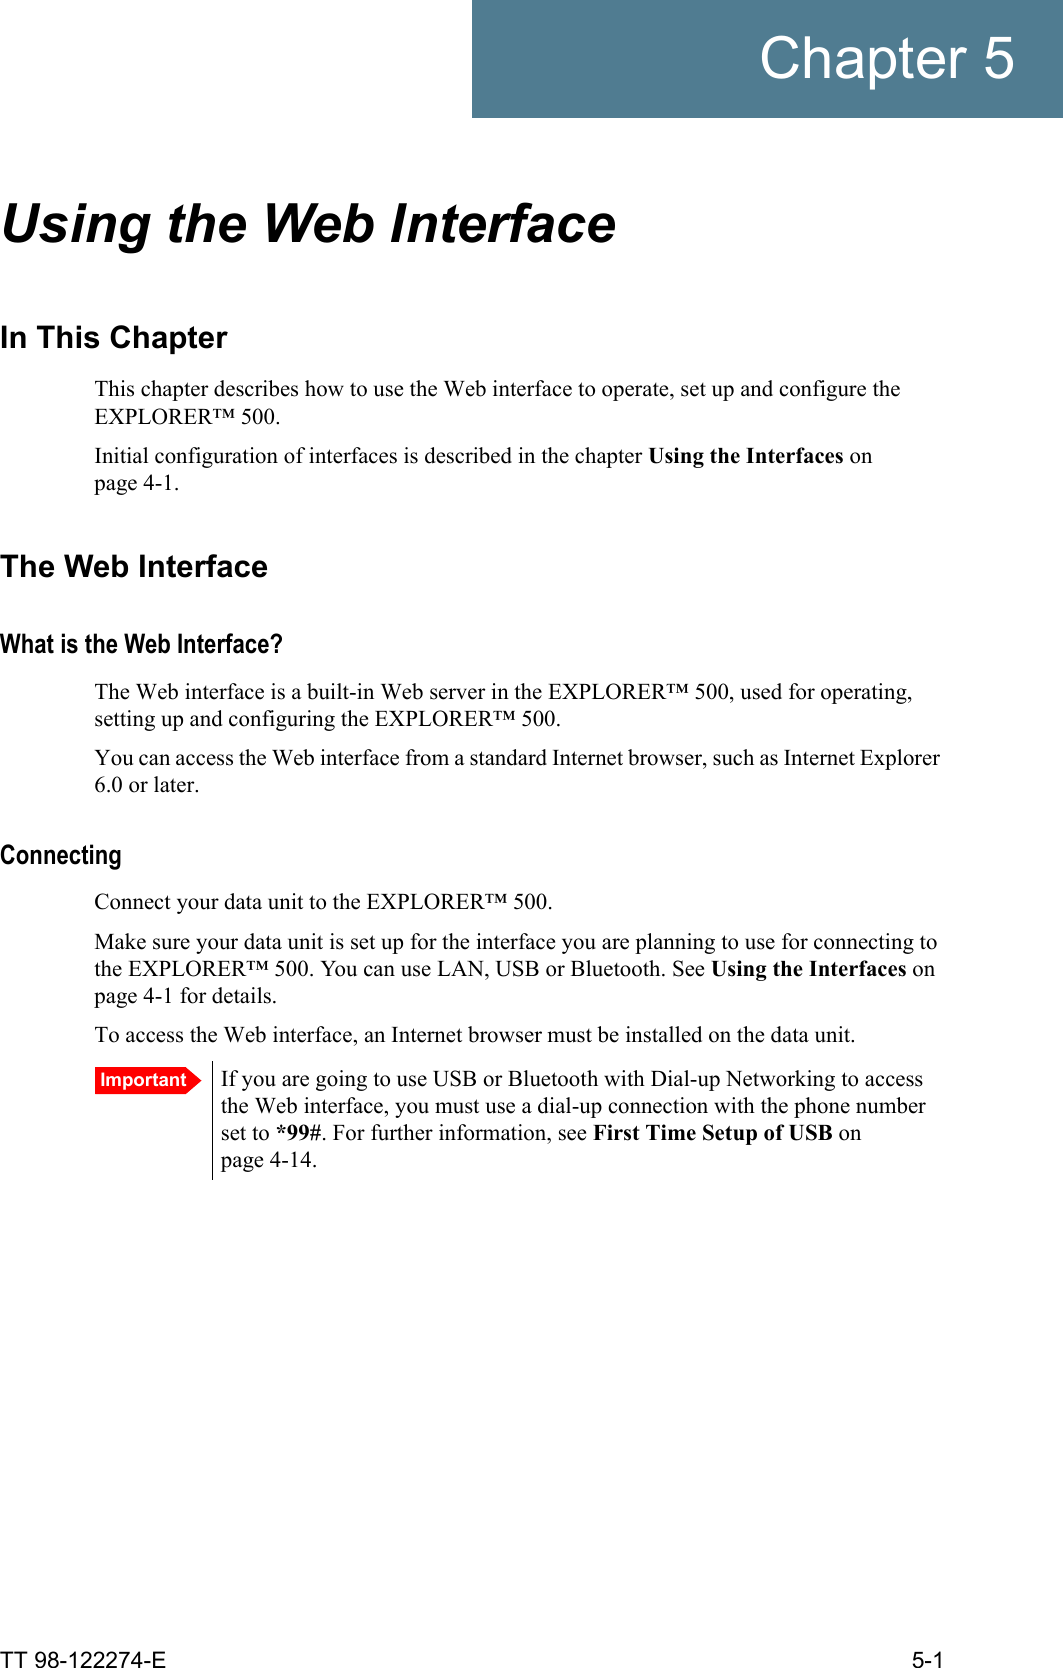 TT 98-122274-E 5-1Chapter 5Using the Web Interface 5In This ChapterThis chapter describes how to use the Web interface to operate, set up and configure the EXPLORER™ 500. Initial configuration of interfaces is described in the chapter Using the Interfaces on page 4-1.The Web InterfaceWhat is the Web Interface?The Web interface is a built-in Web server in the EXPLORER™ 500, used for operating, setting up and configuring the EXPLORER™ 500. You can access the Web interface from a standard Internet browser, such as Internet Explorer 6.0 or later.ConnectingConnect your data unit to the EXPLORER™ 500.Make sure your data unit is set up for the interface you are planning to use for connecting to the EXPLORER™ 500. You can use LAN, USB or Bluetooth. See Using the Interfaces on page 4-1 for details.To access the Web interface, an Internet browser must be installed on the data unit. Important If you are going to use USB or Bluetooth with Dial-up Networking to access the Web interface, you must use a dial-up connection with the phone number set to *99#. For further information, see First Time Setup of USB on page 4-14.